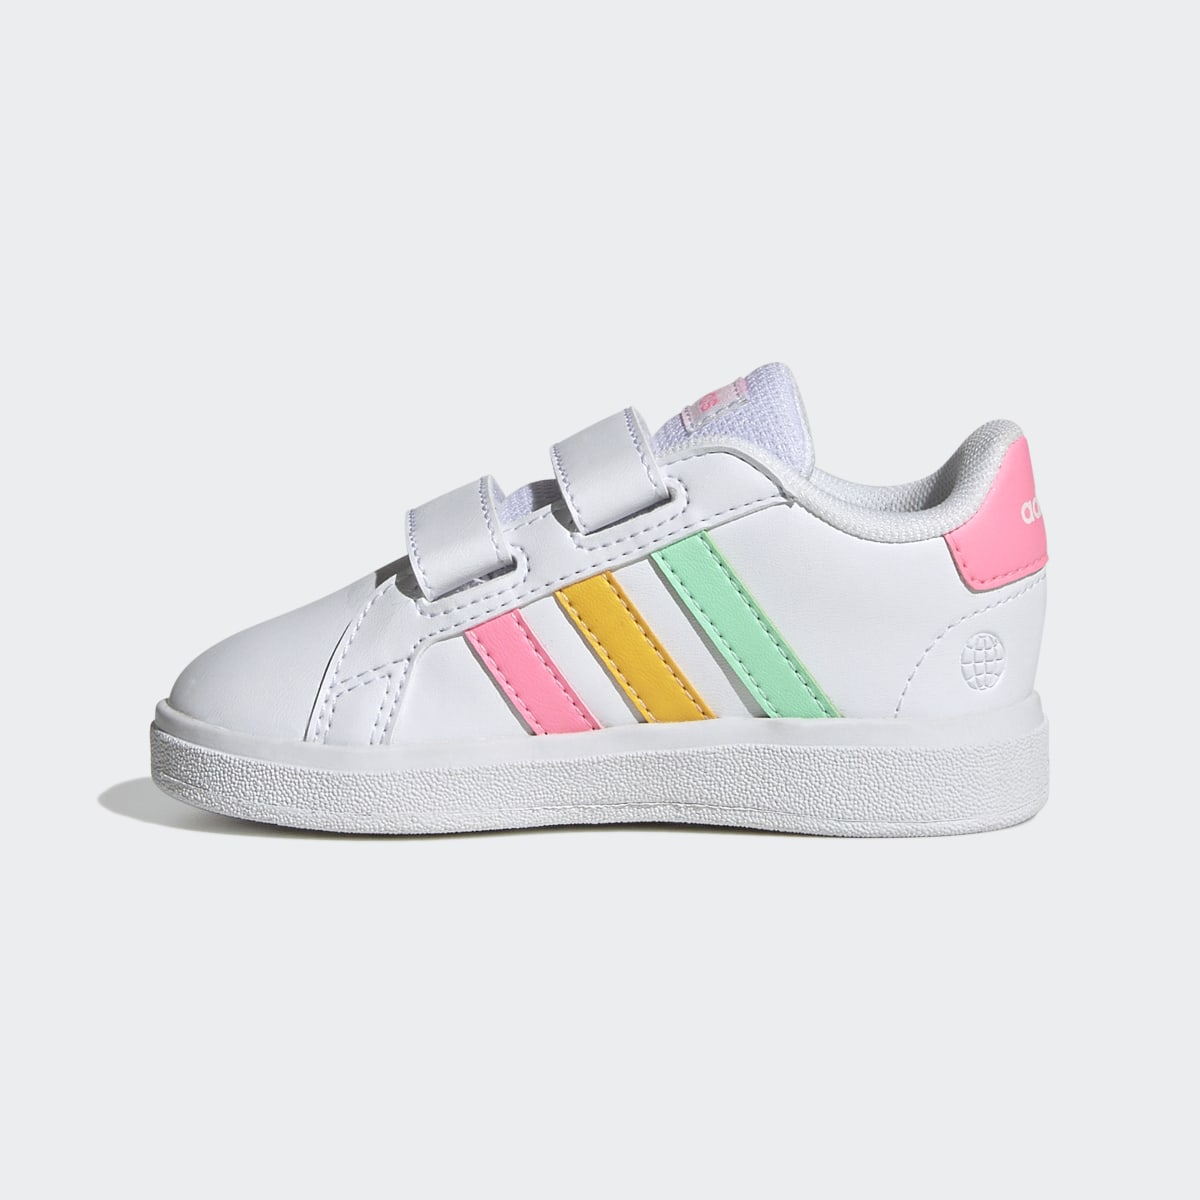 Adidas Grand Court Lifestyle Hook and Loop Schuh. 7